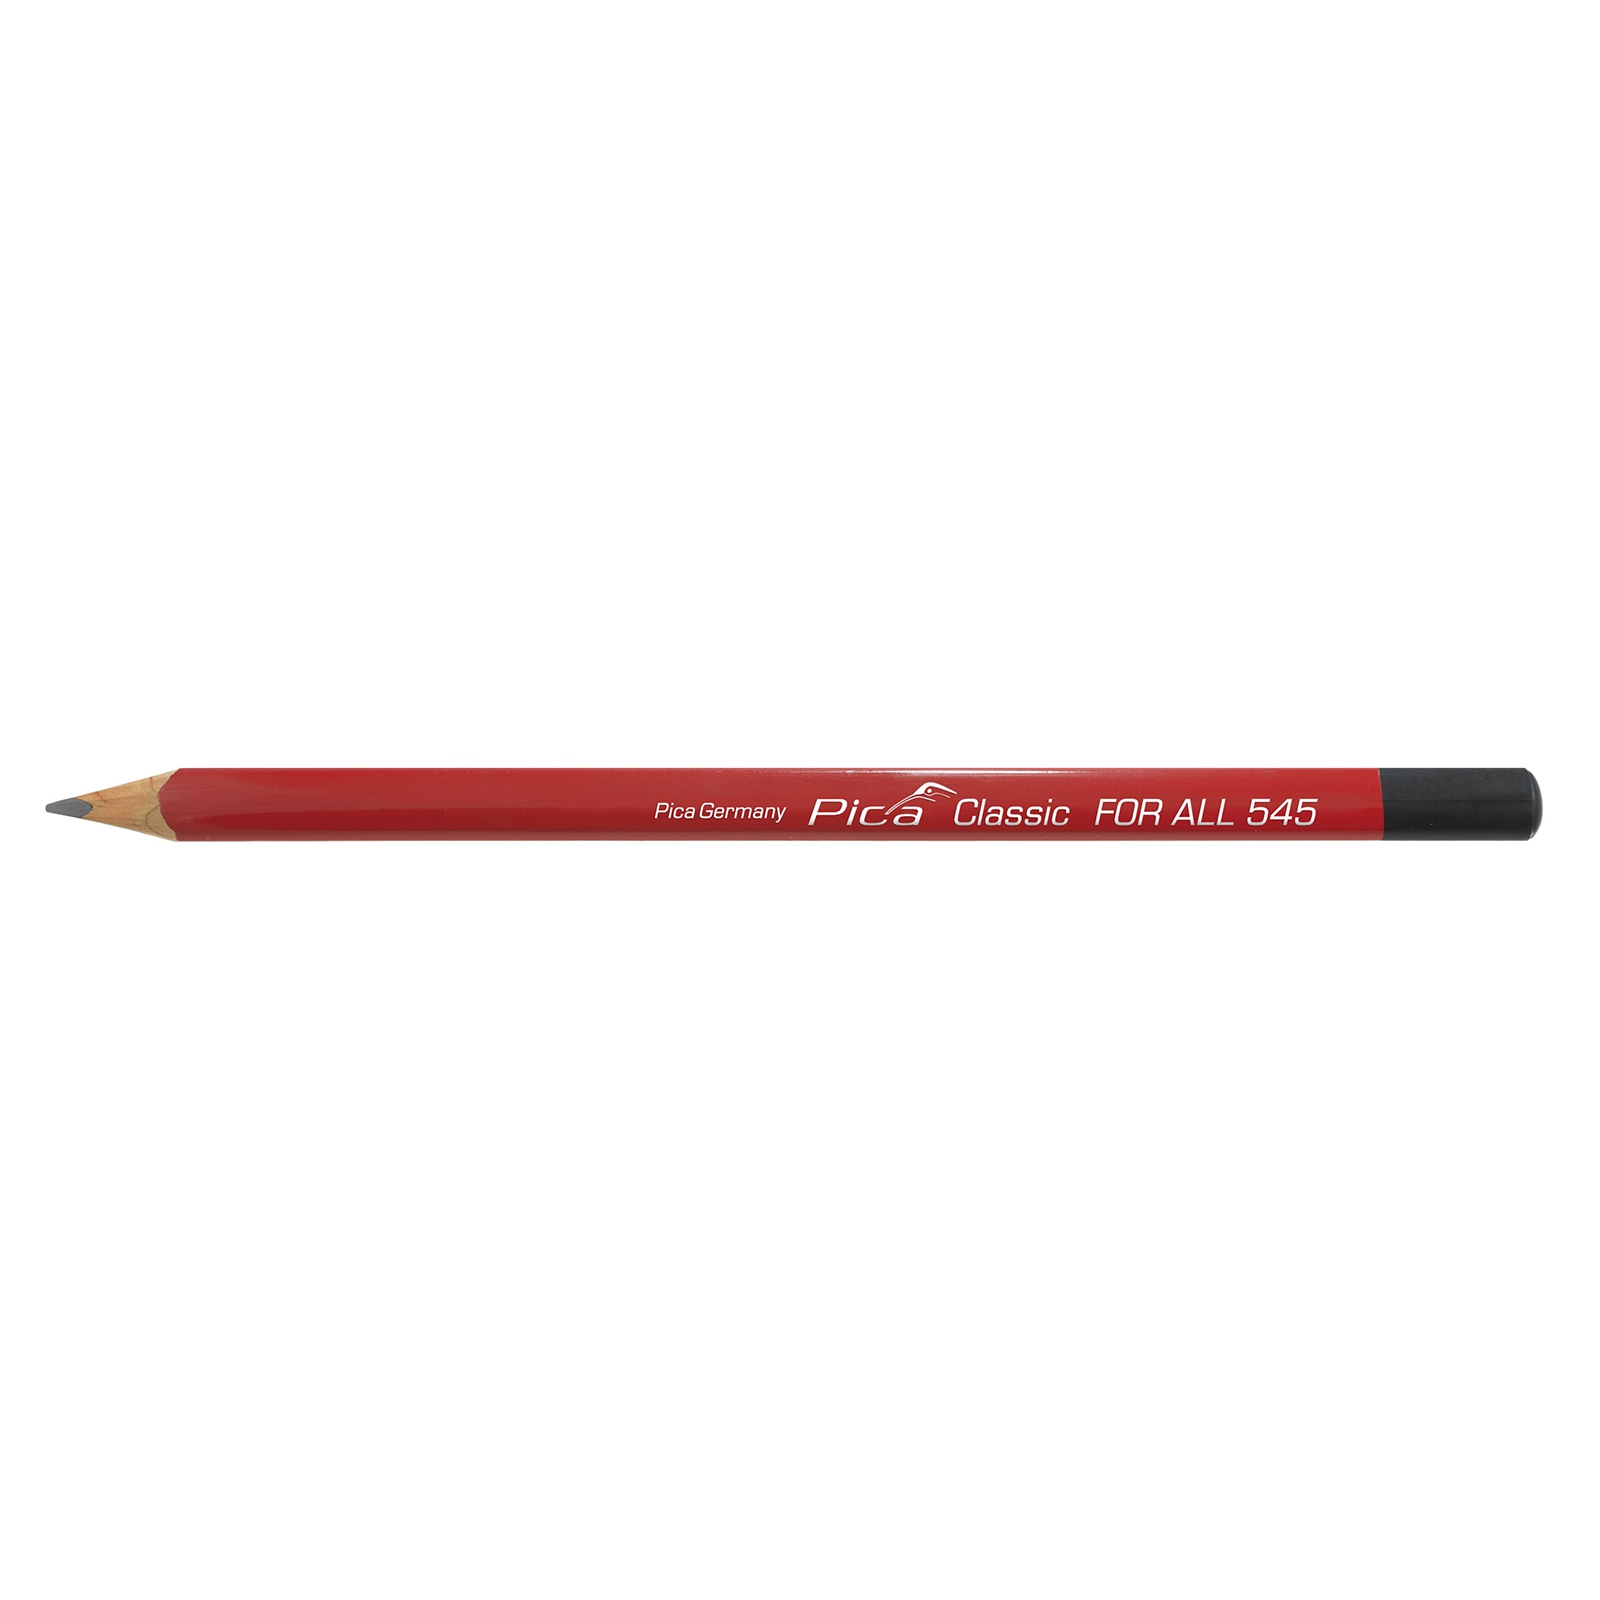 PICA Universal-Markierstift Classic FOR ALL 545